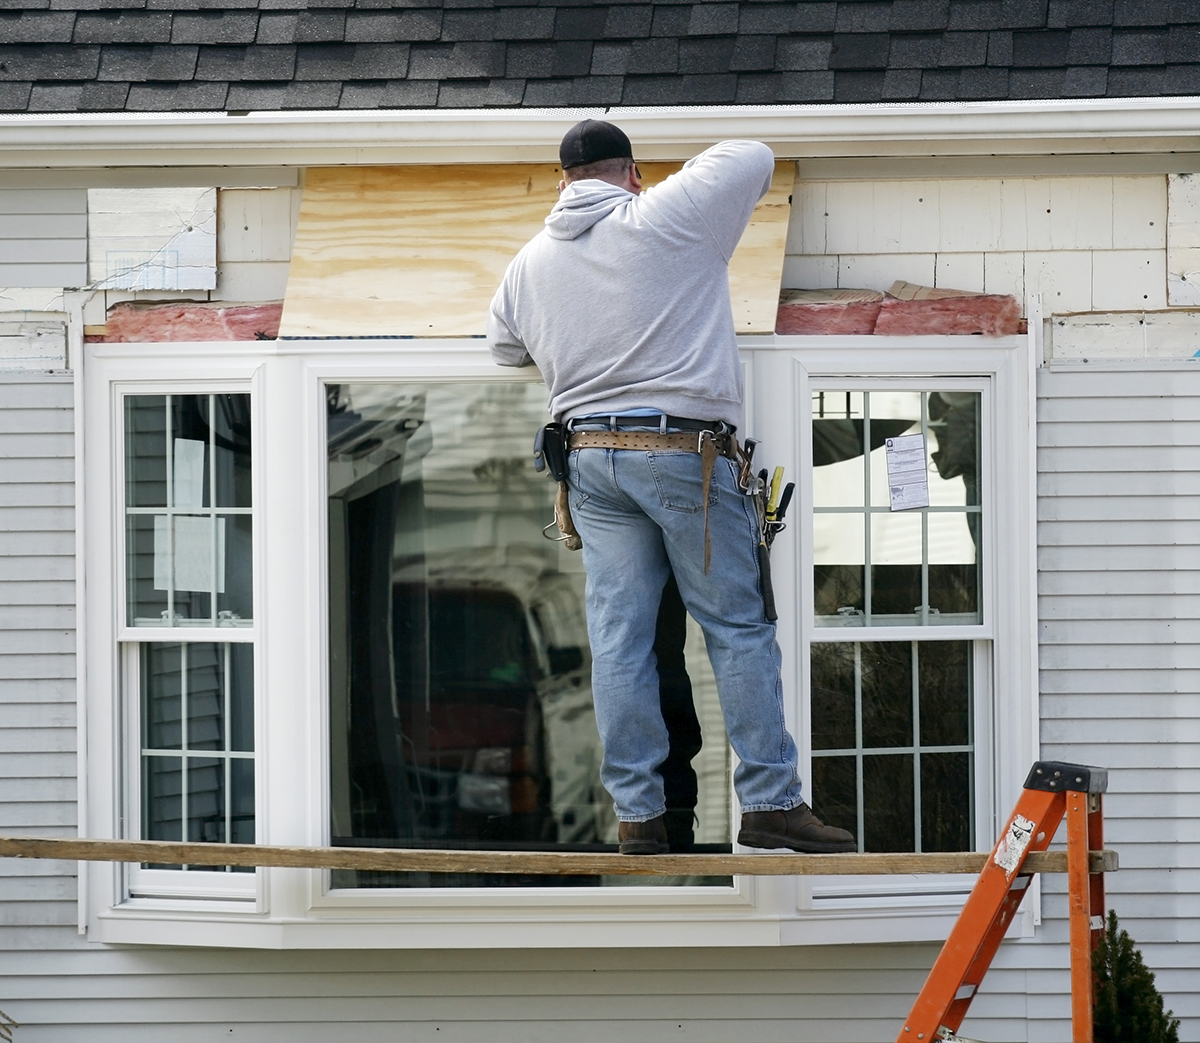  7 Things to Consider When Replacing Your Windows